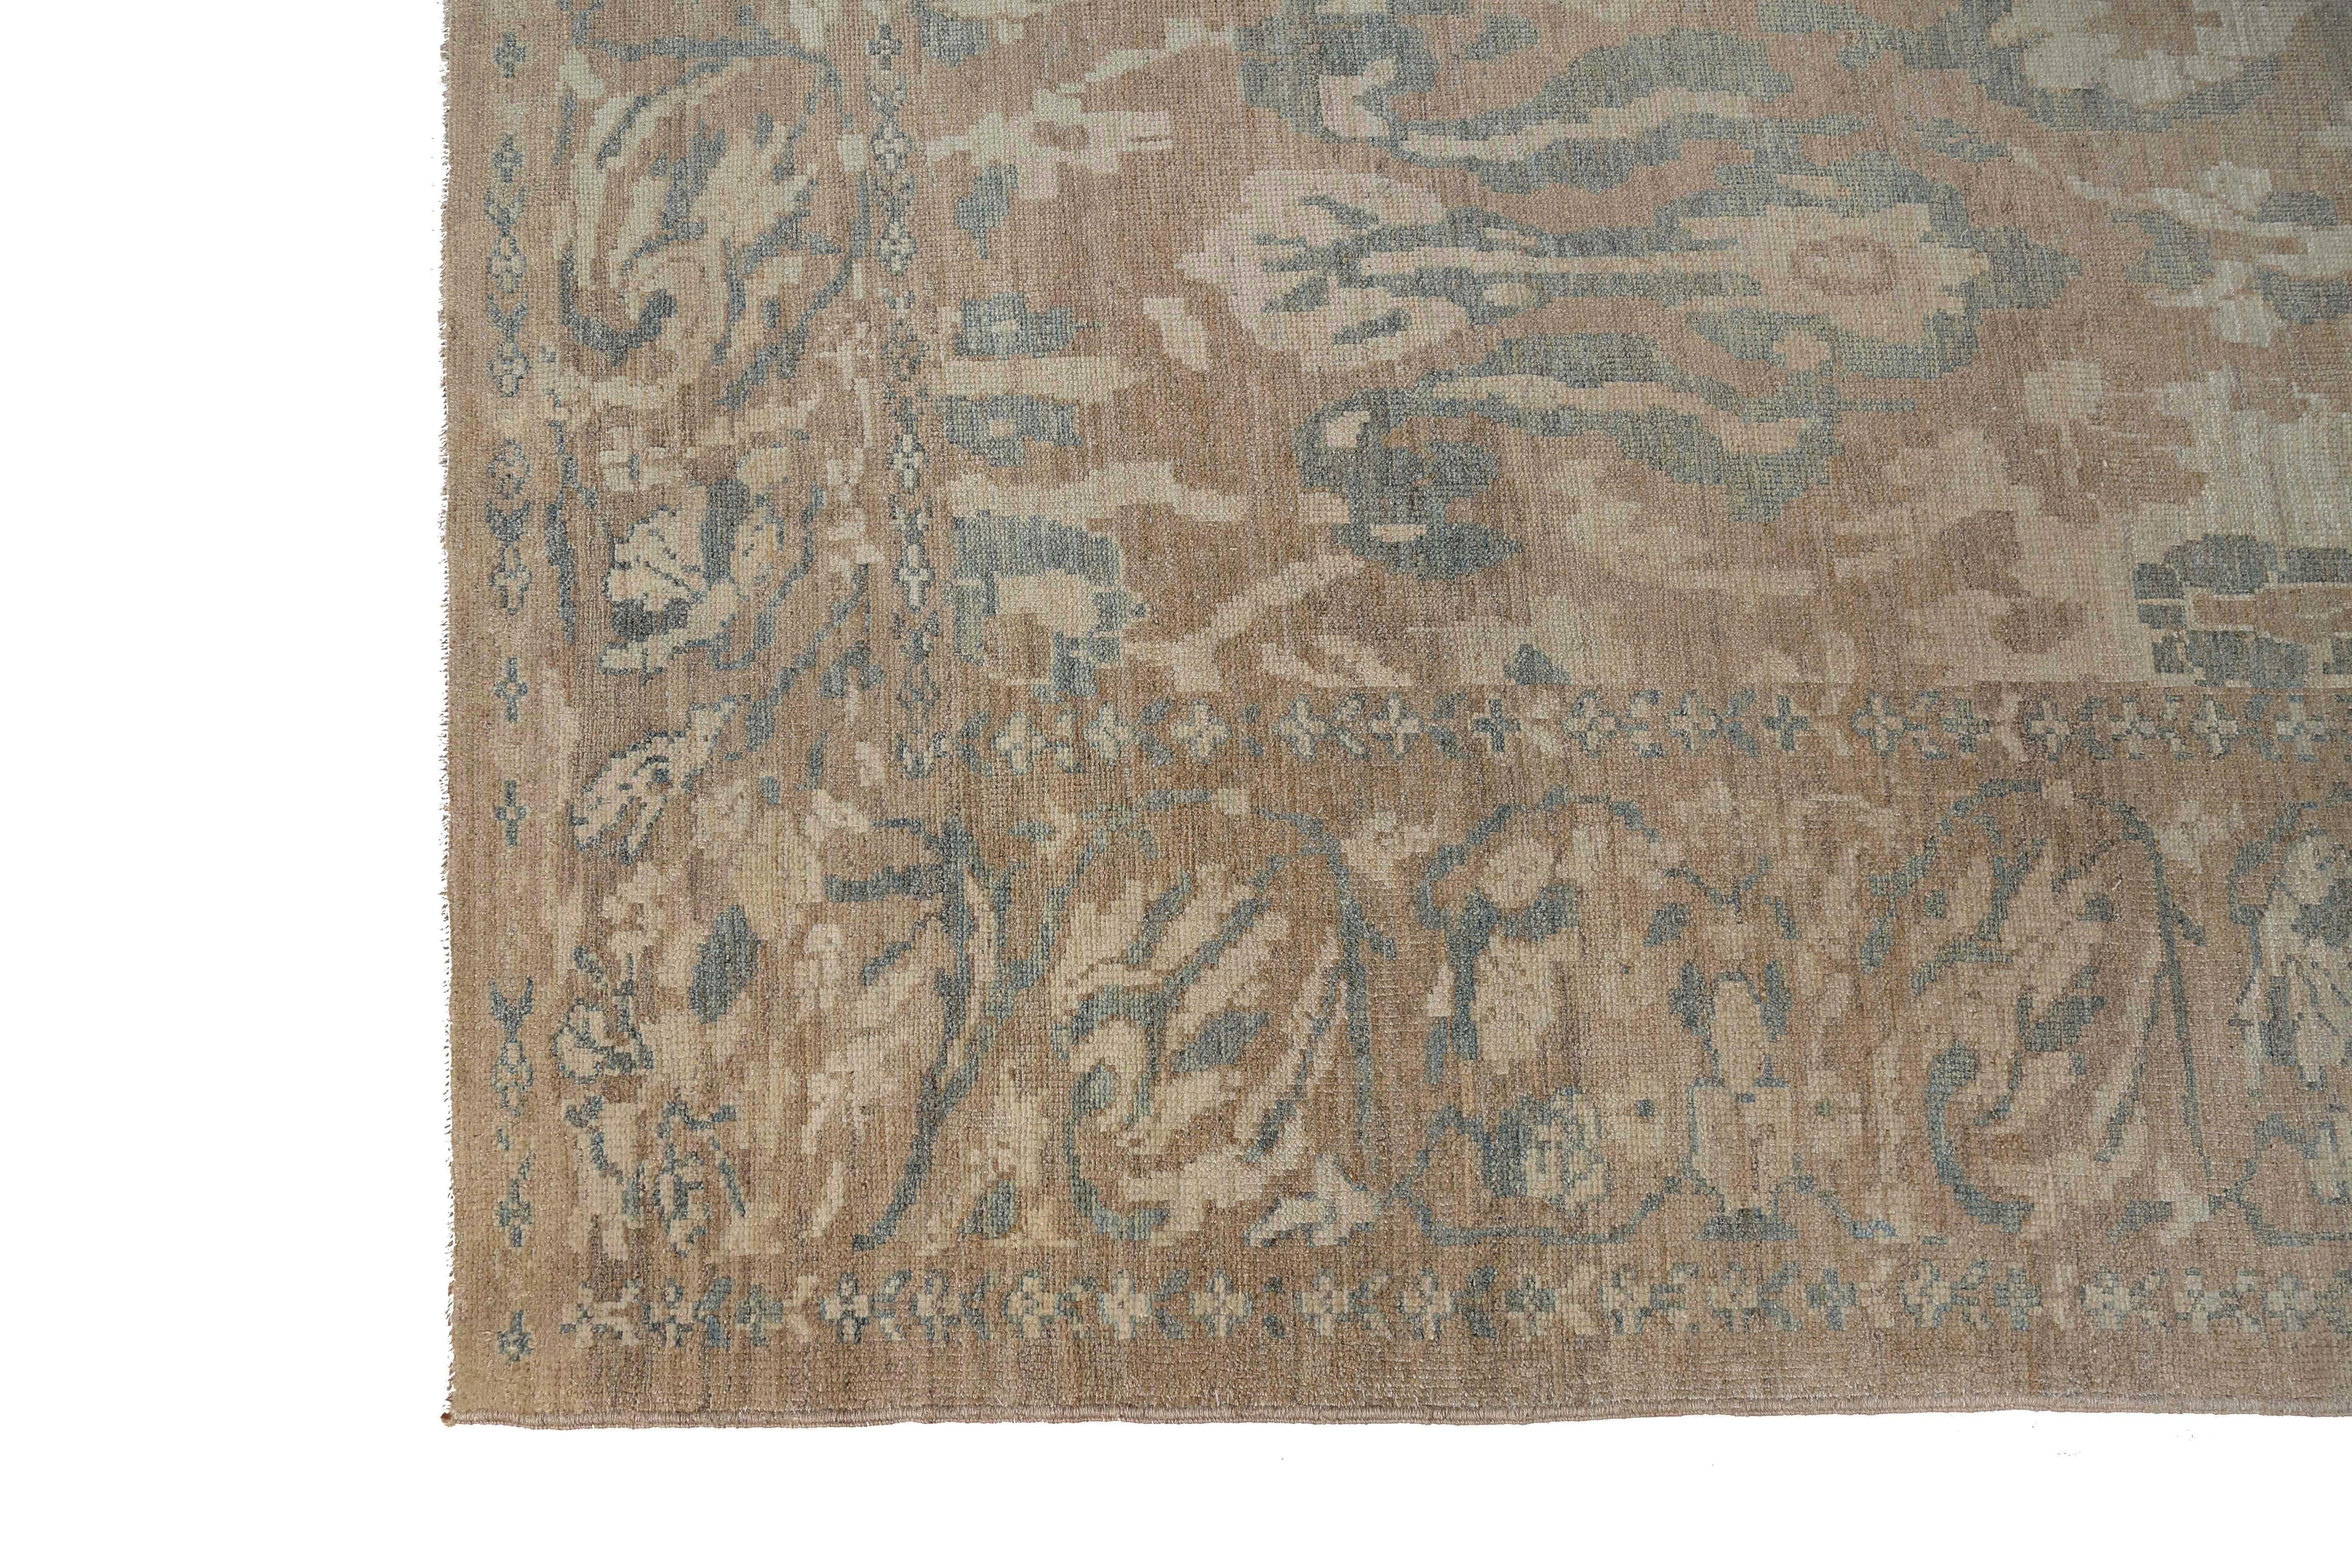 Introducing our stunning handmade Sultanabad rug, measuring 8'10